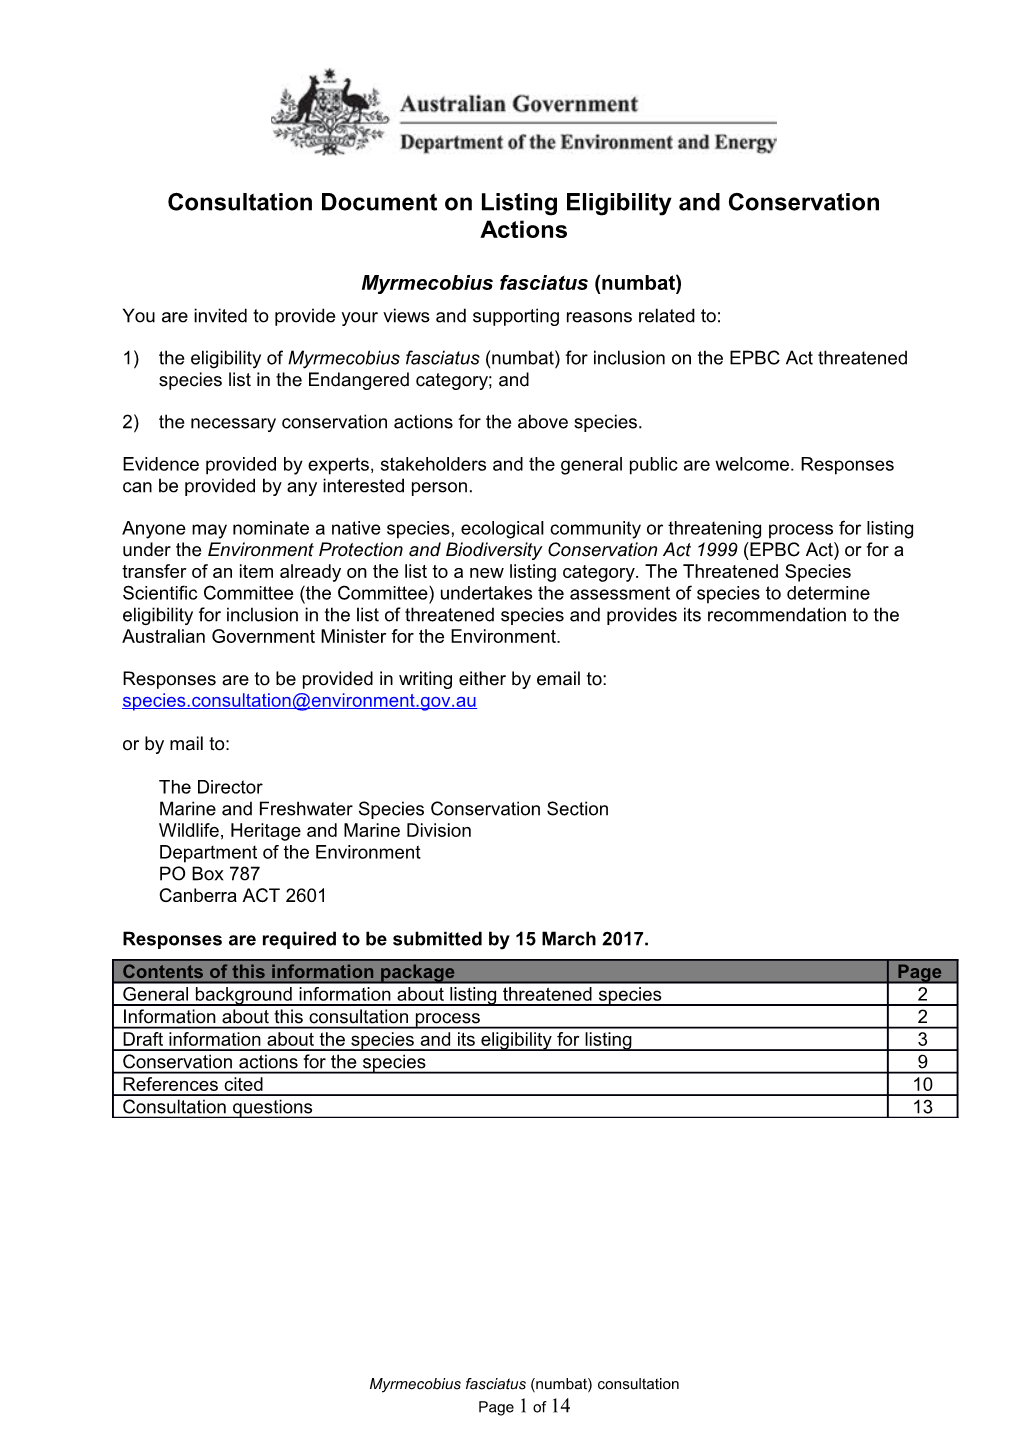 Consultation Document on Listing Eligibility and Conservation Actions - Myrmecobius Fasciatus